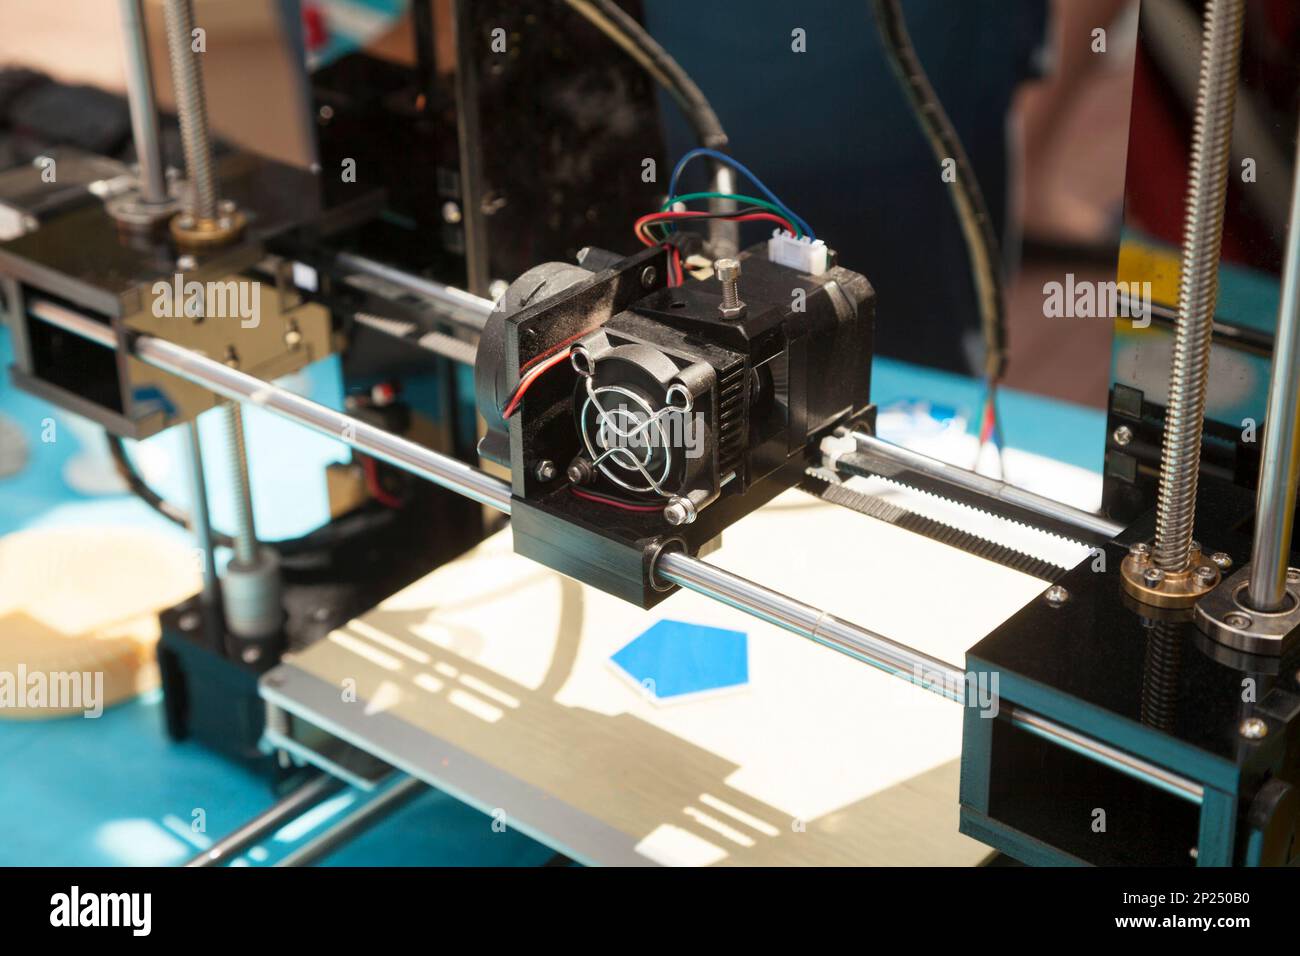 3d printer creating a new plastic object close-up. 3 dimensional printing process on innovative electronic equipment Stock Photo